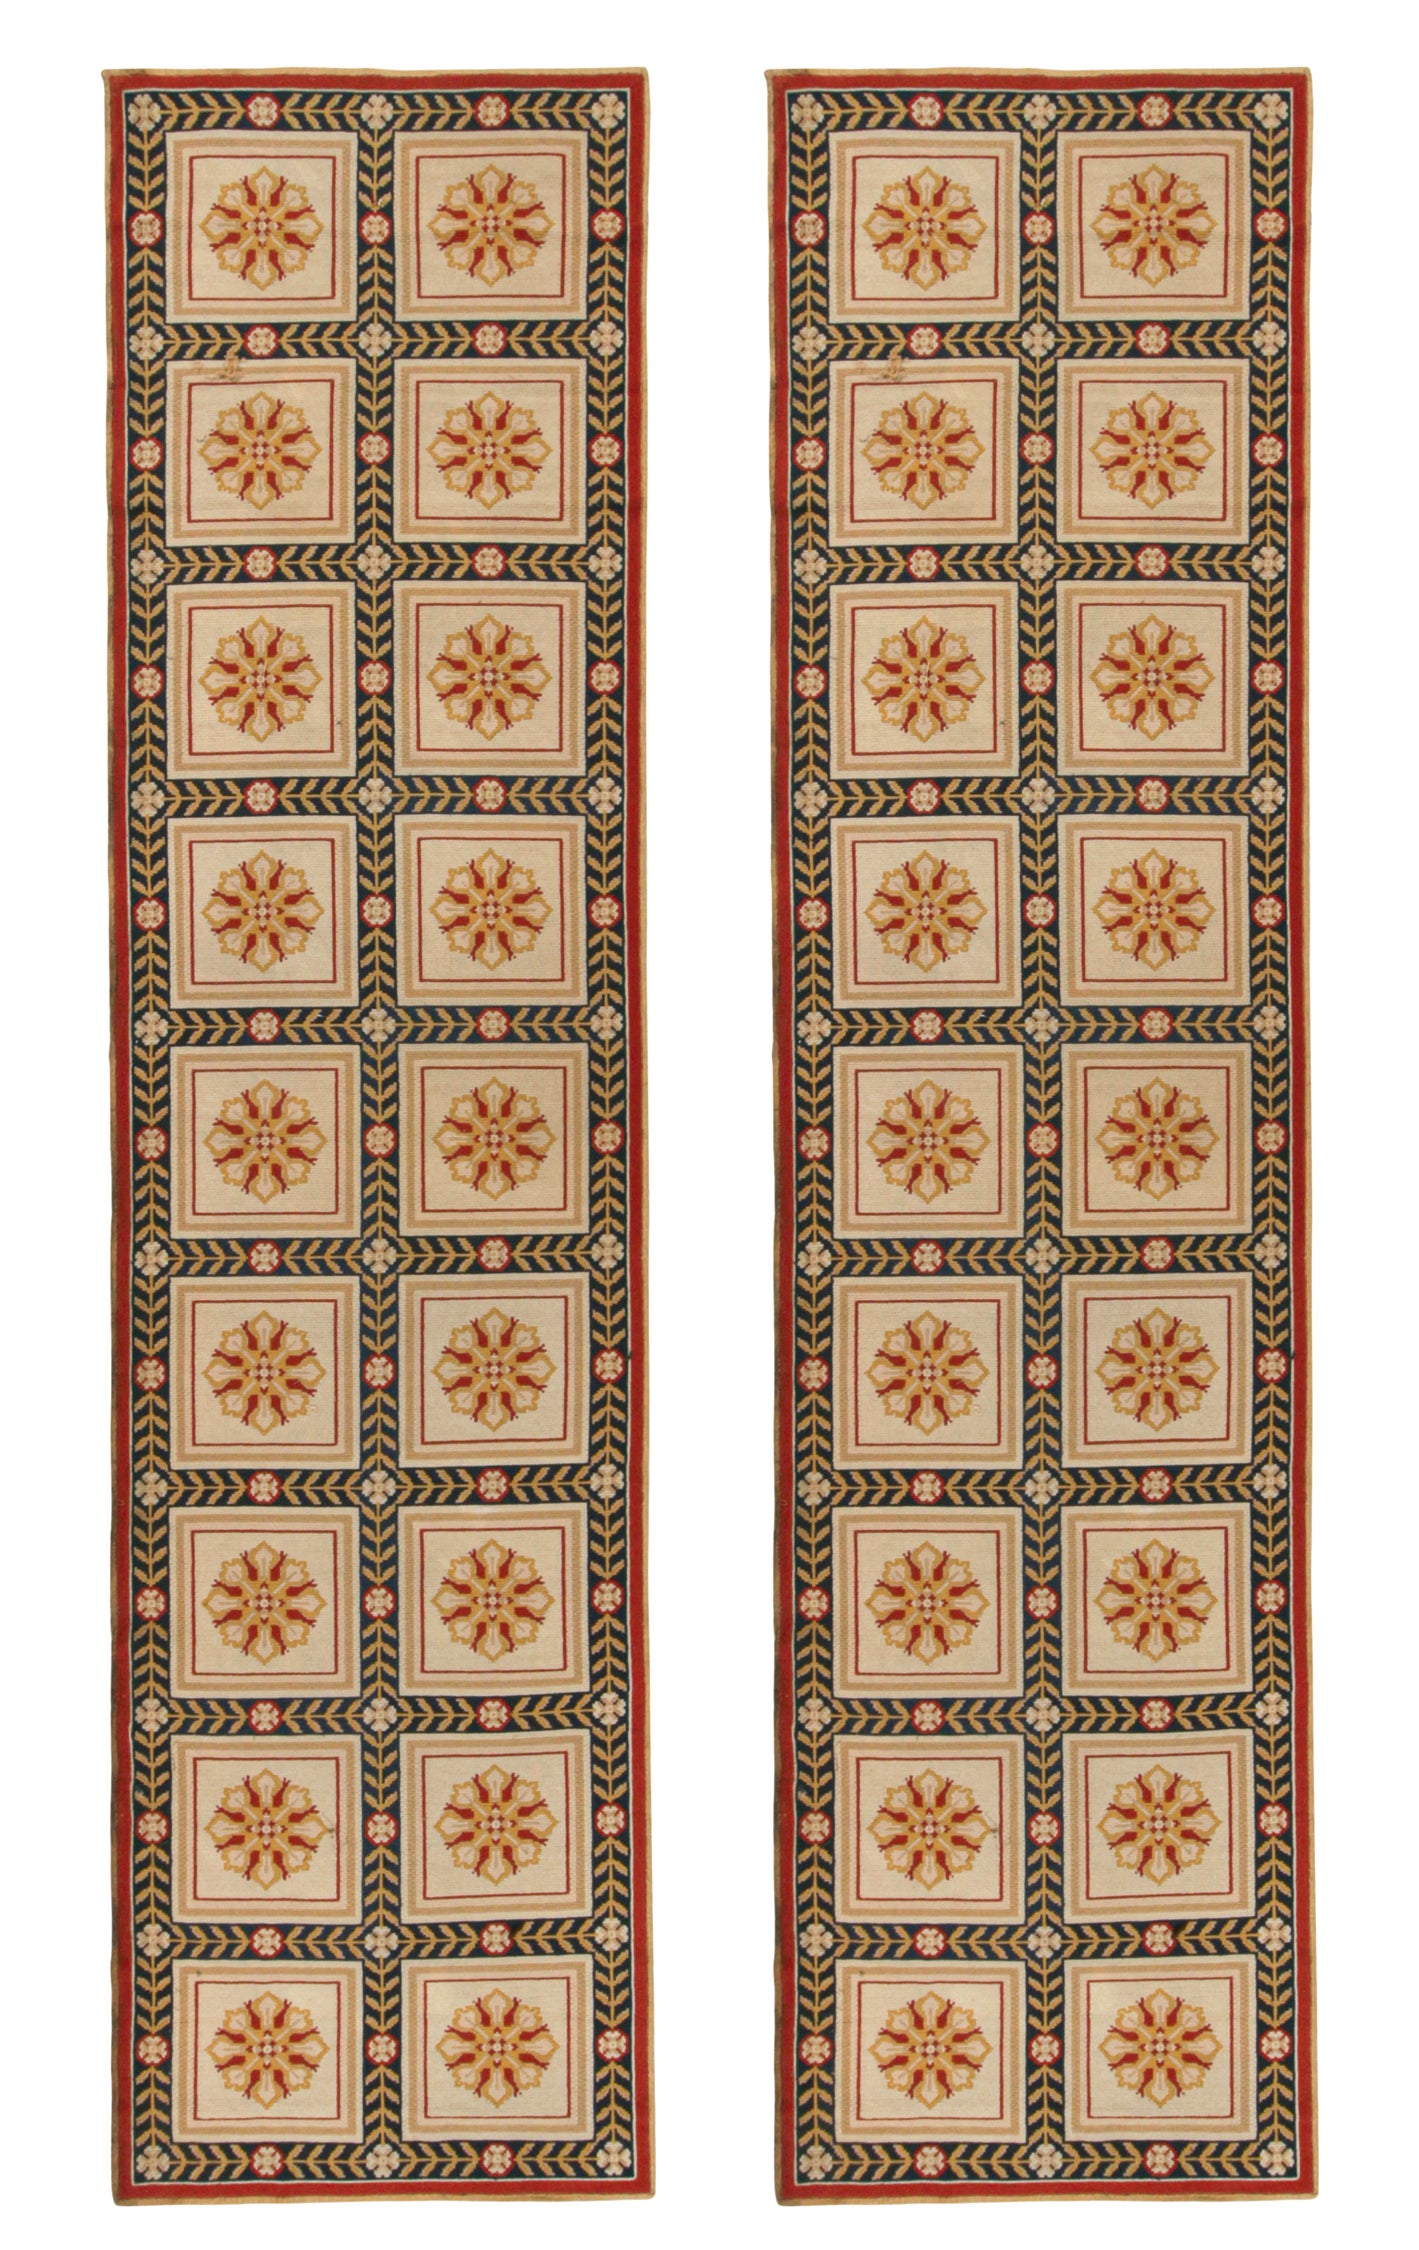 Vintage Arraiolos Needlepoint Runners in Beige Floral Medallions by Rug & Kilim For Sale